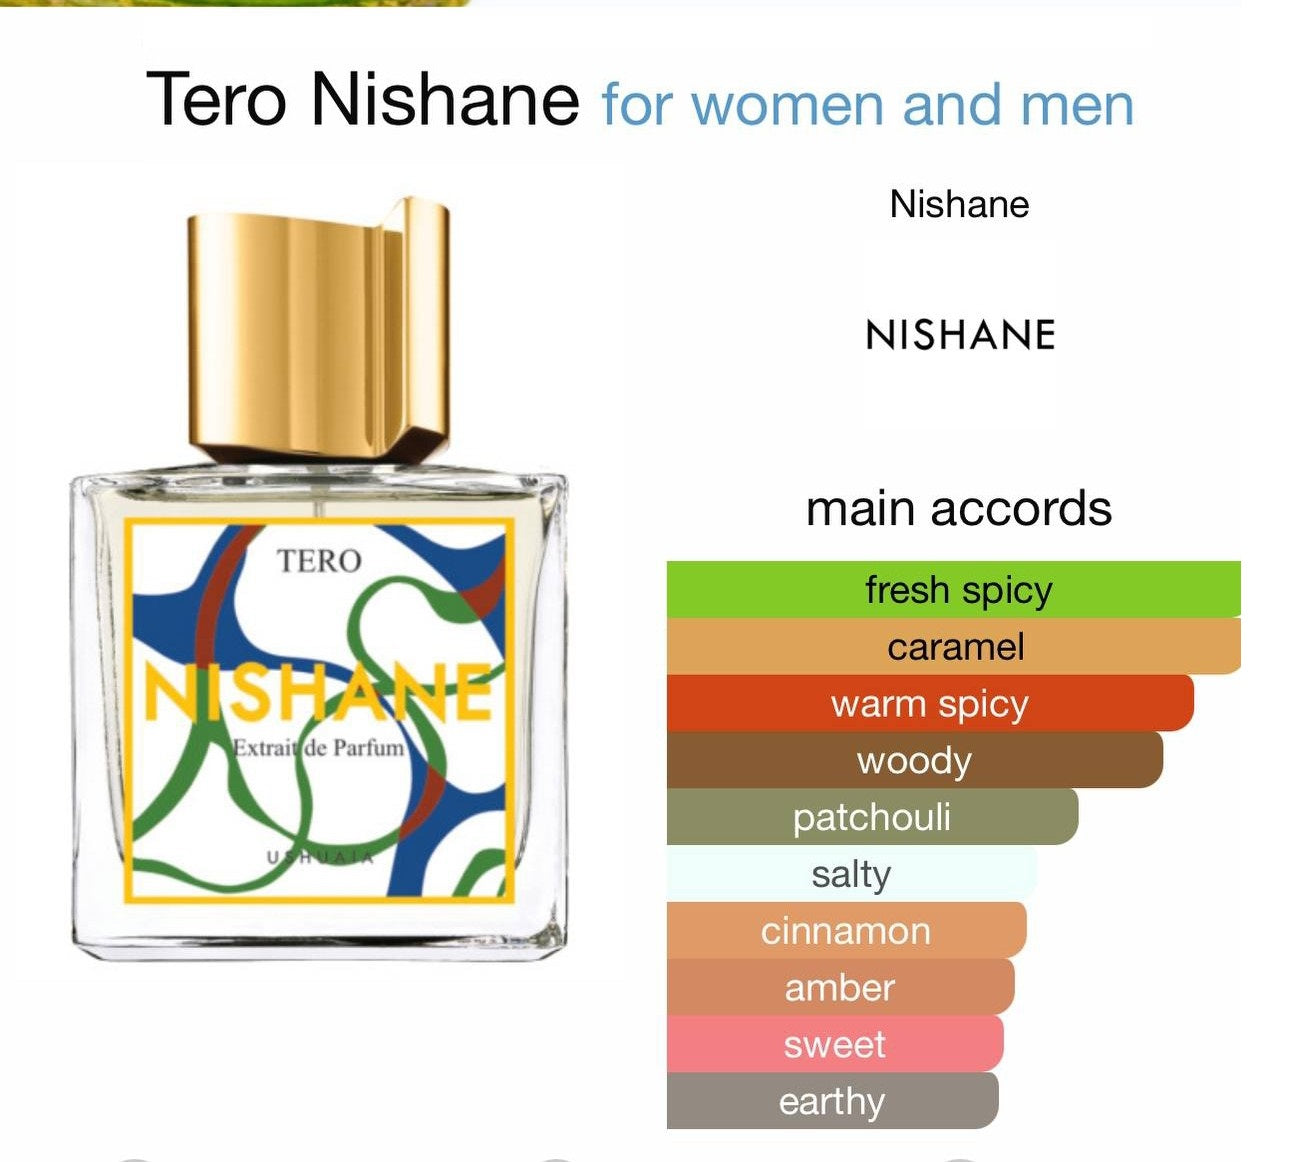 Our Impression of Nishane - Tero for men and women